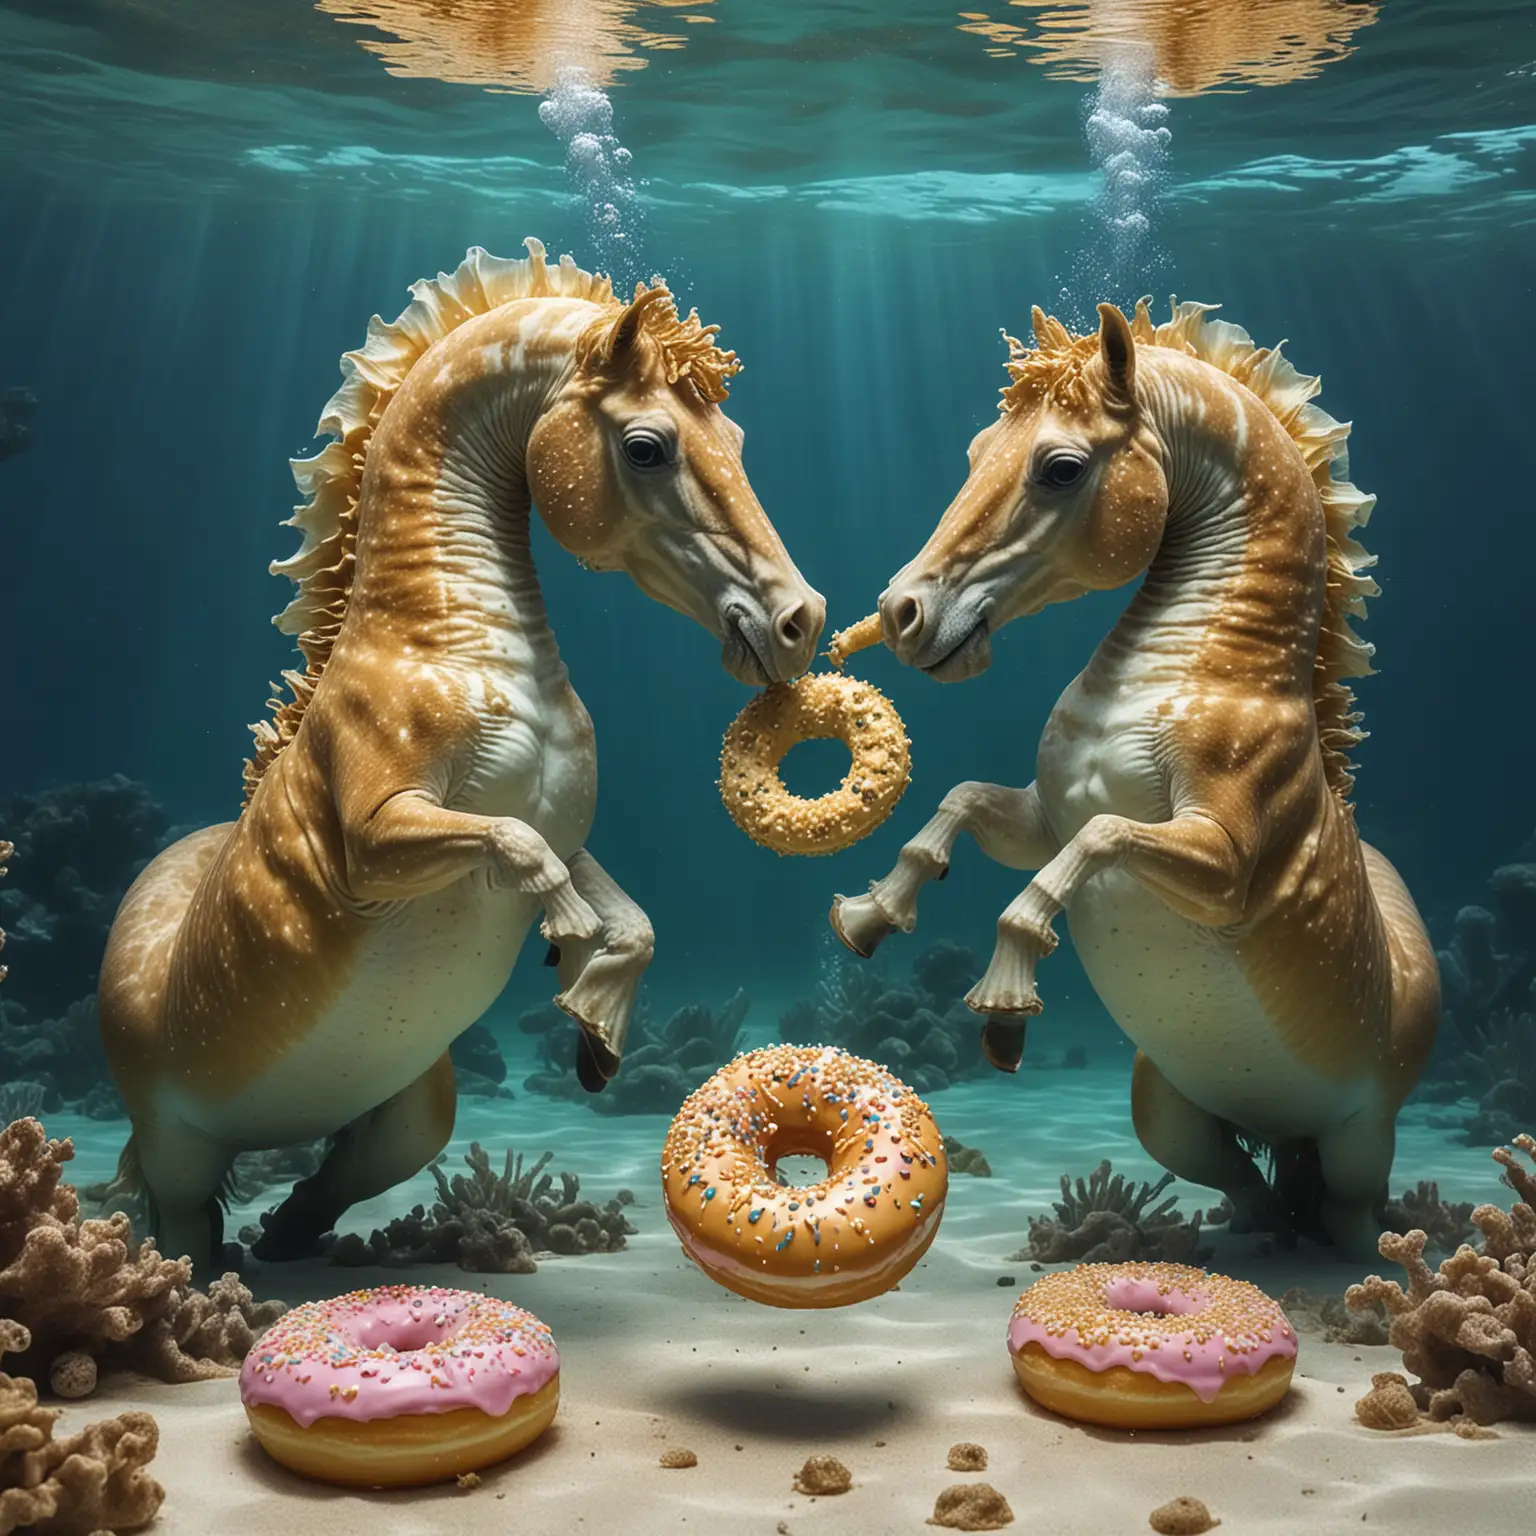 Two sea horses eating donuts underwater, 100 shades of blues, gold tones, extre.e highlights, high definition, cute, fun